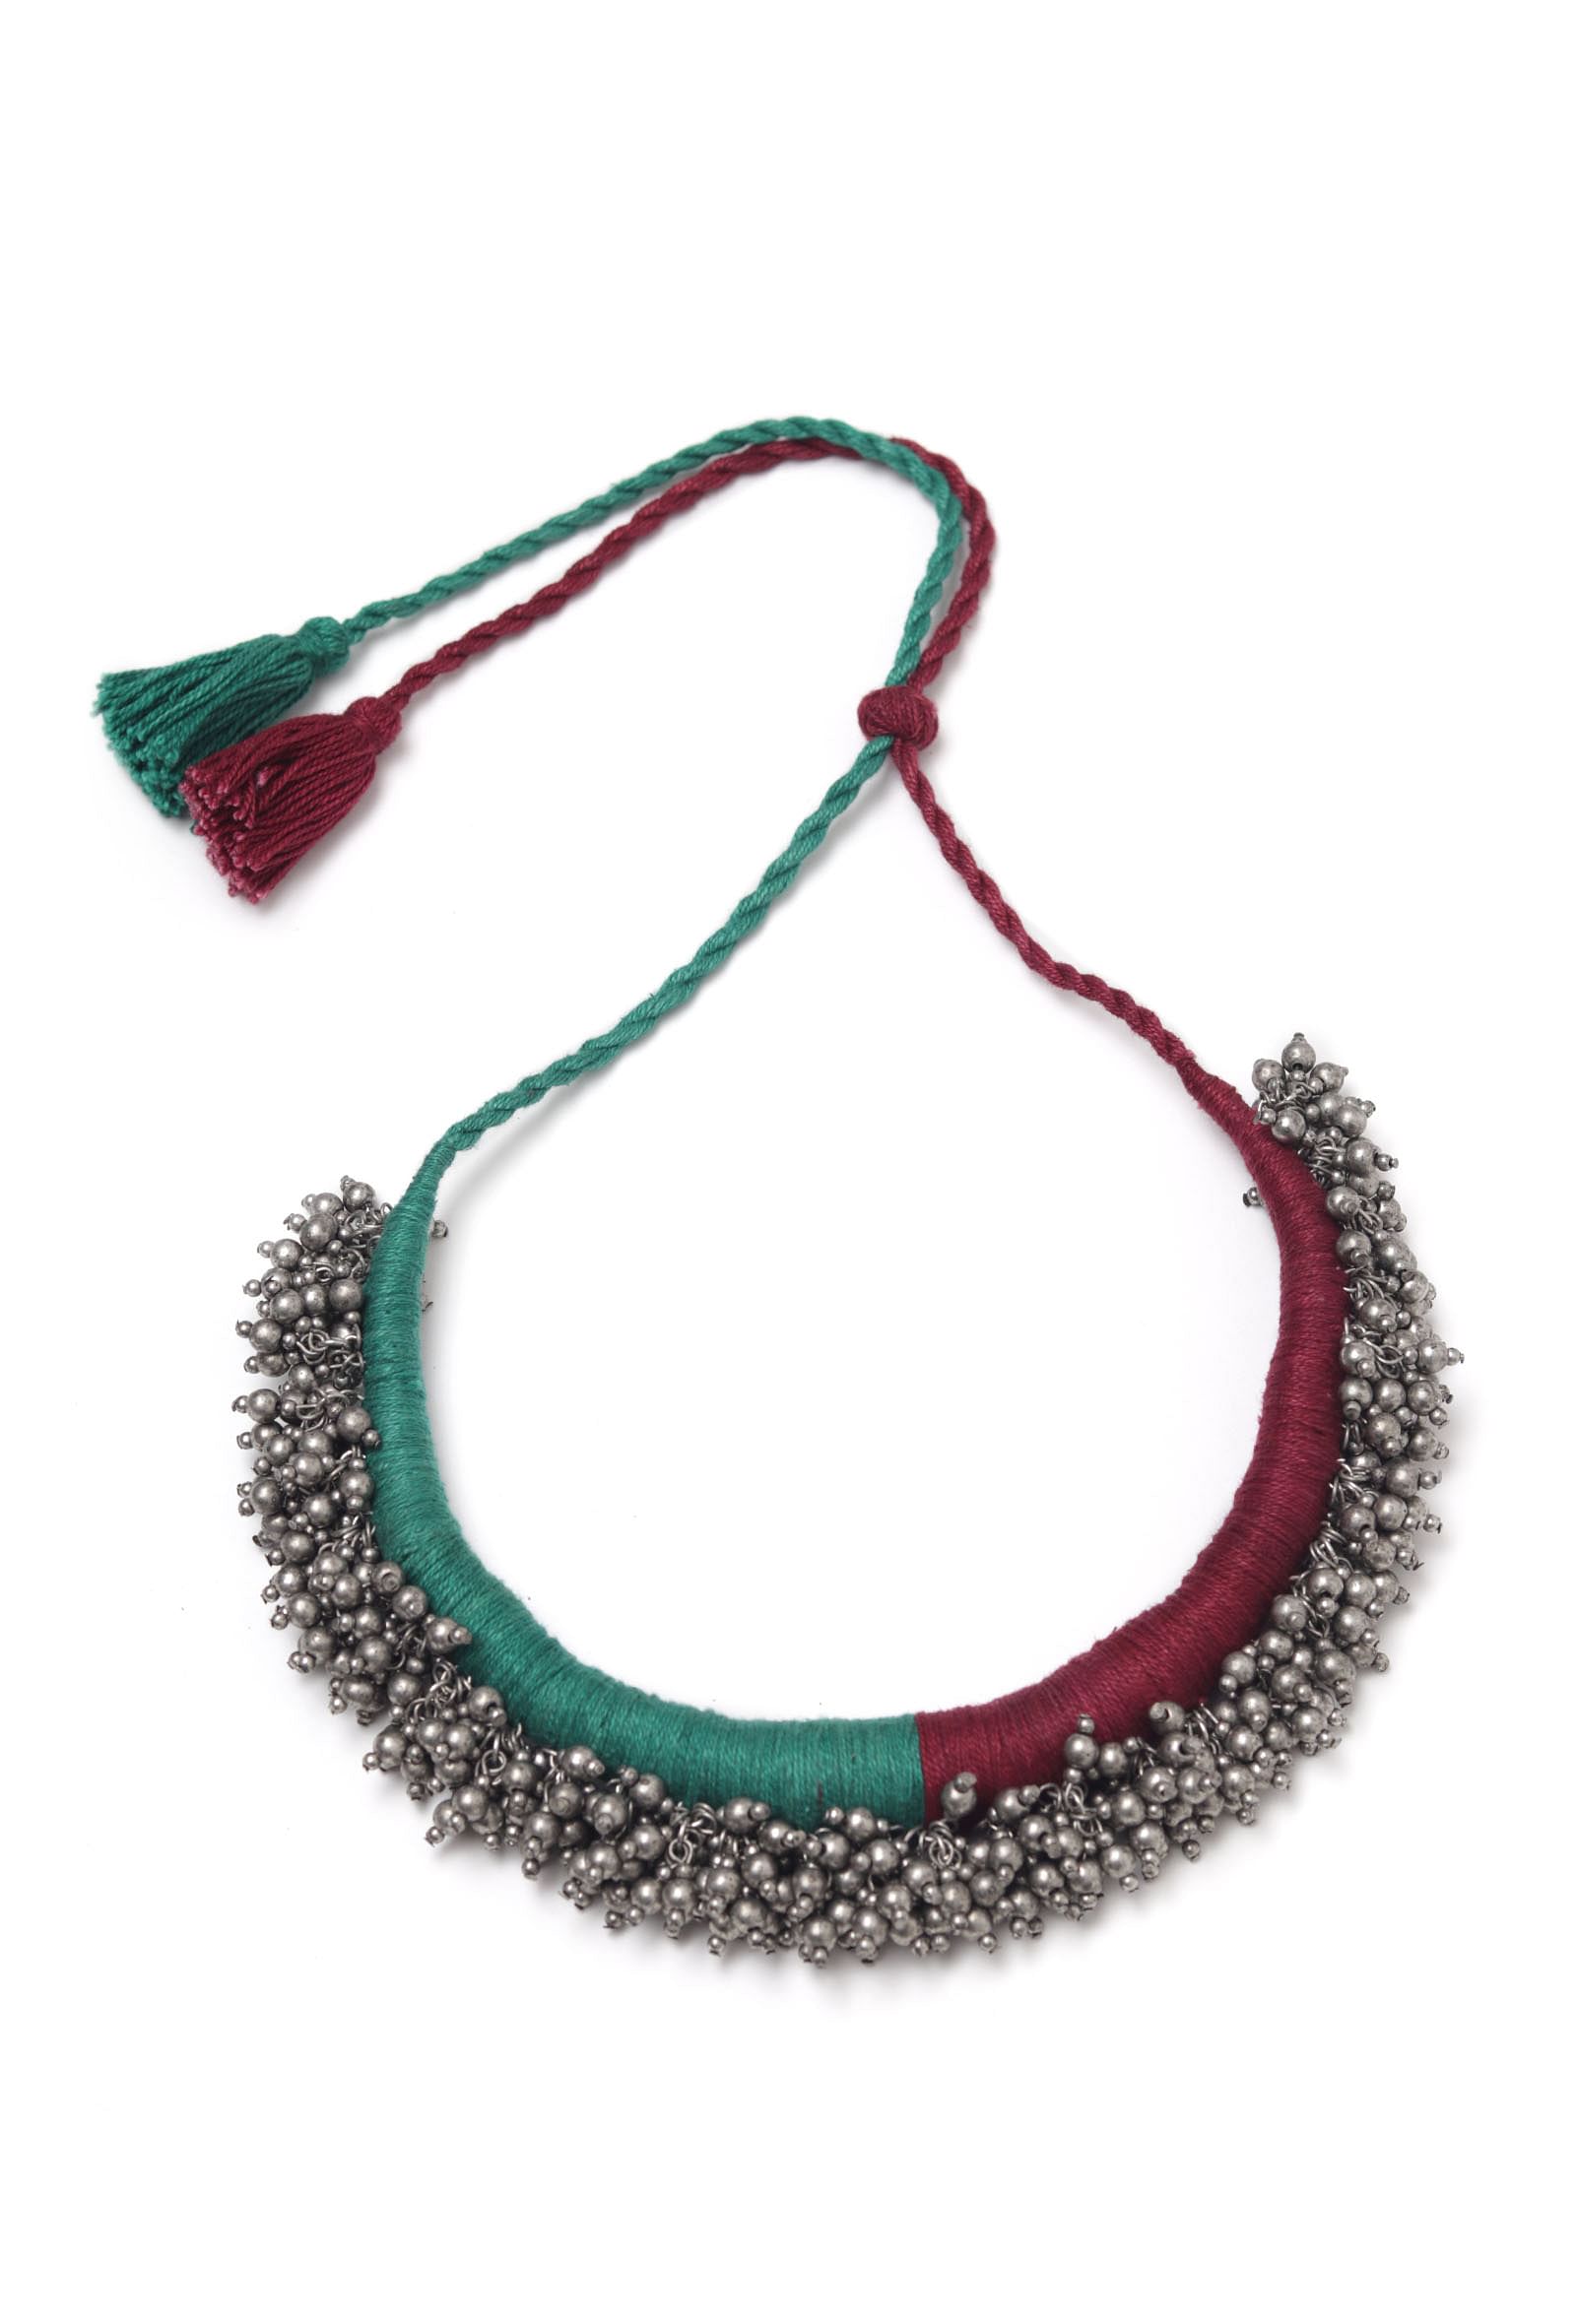 Nihima Duo Red and Green Tribal Ghungroo Necklace